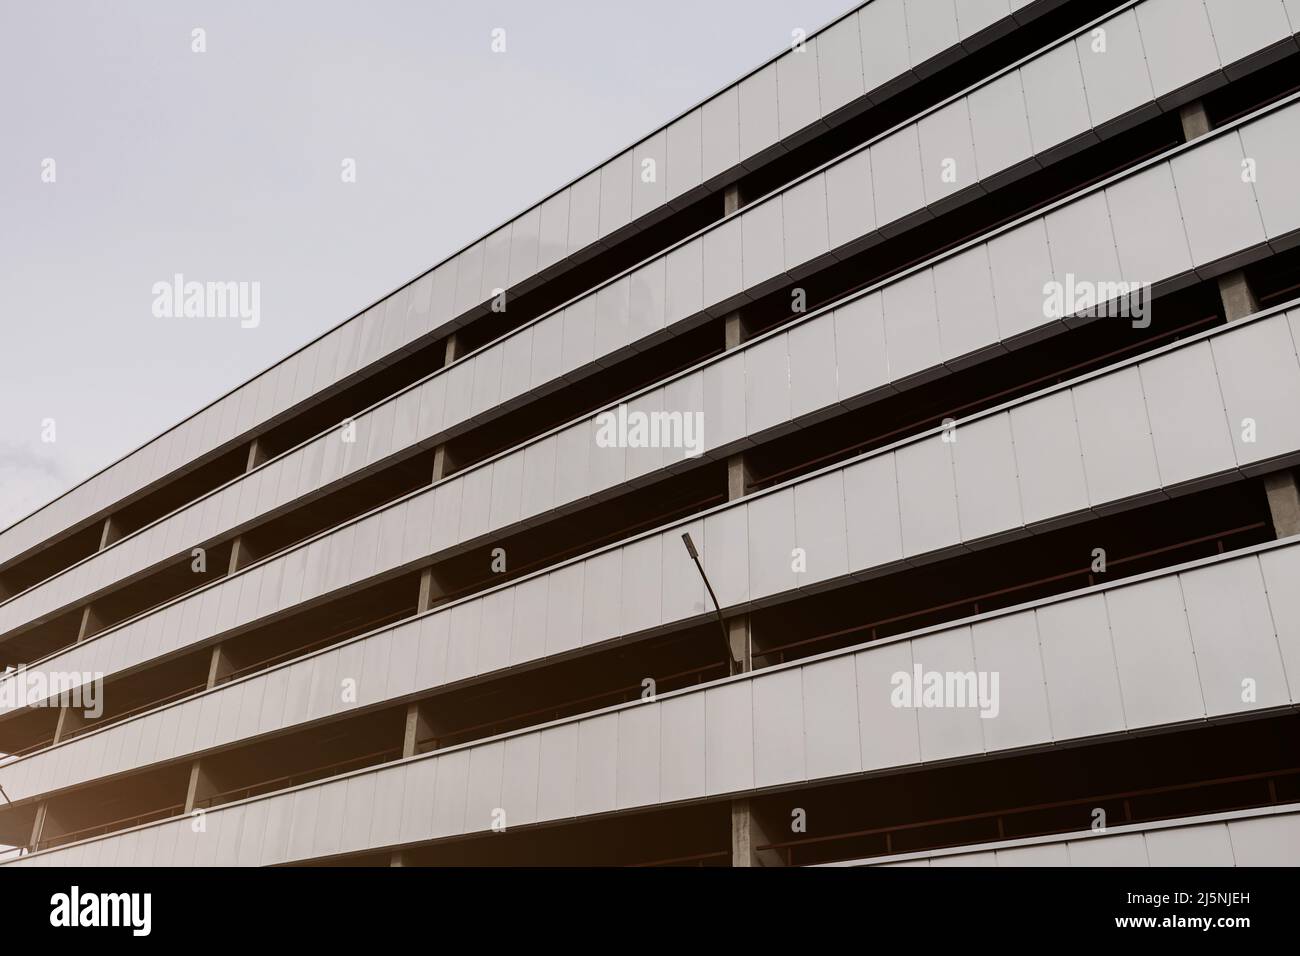 typical multi level parking garage facade and exterior. Stock Photo